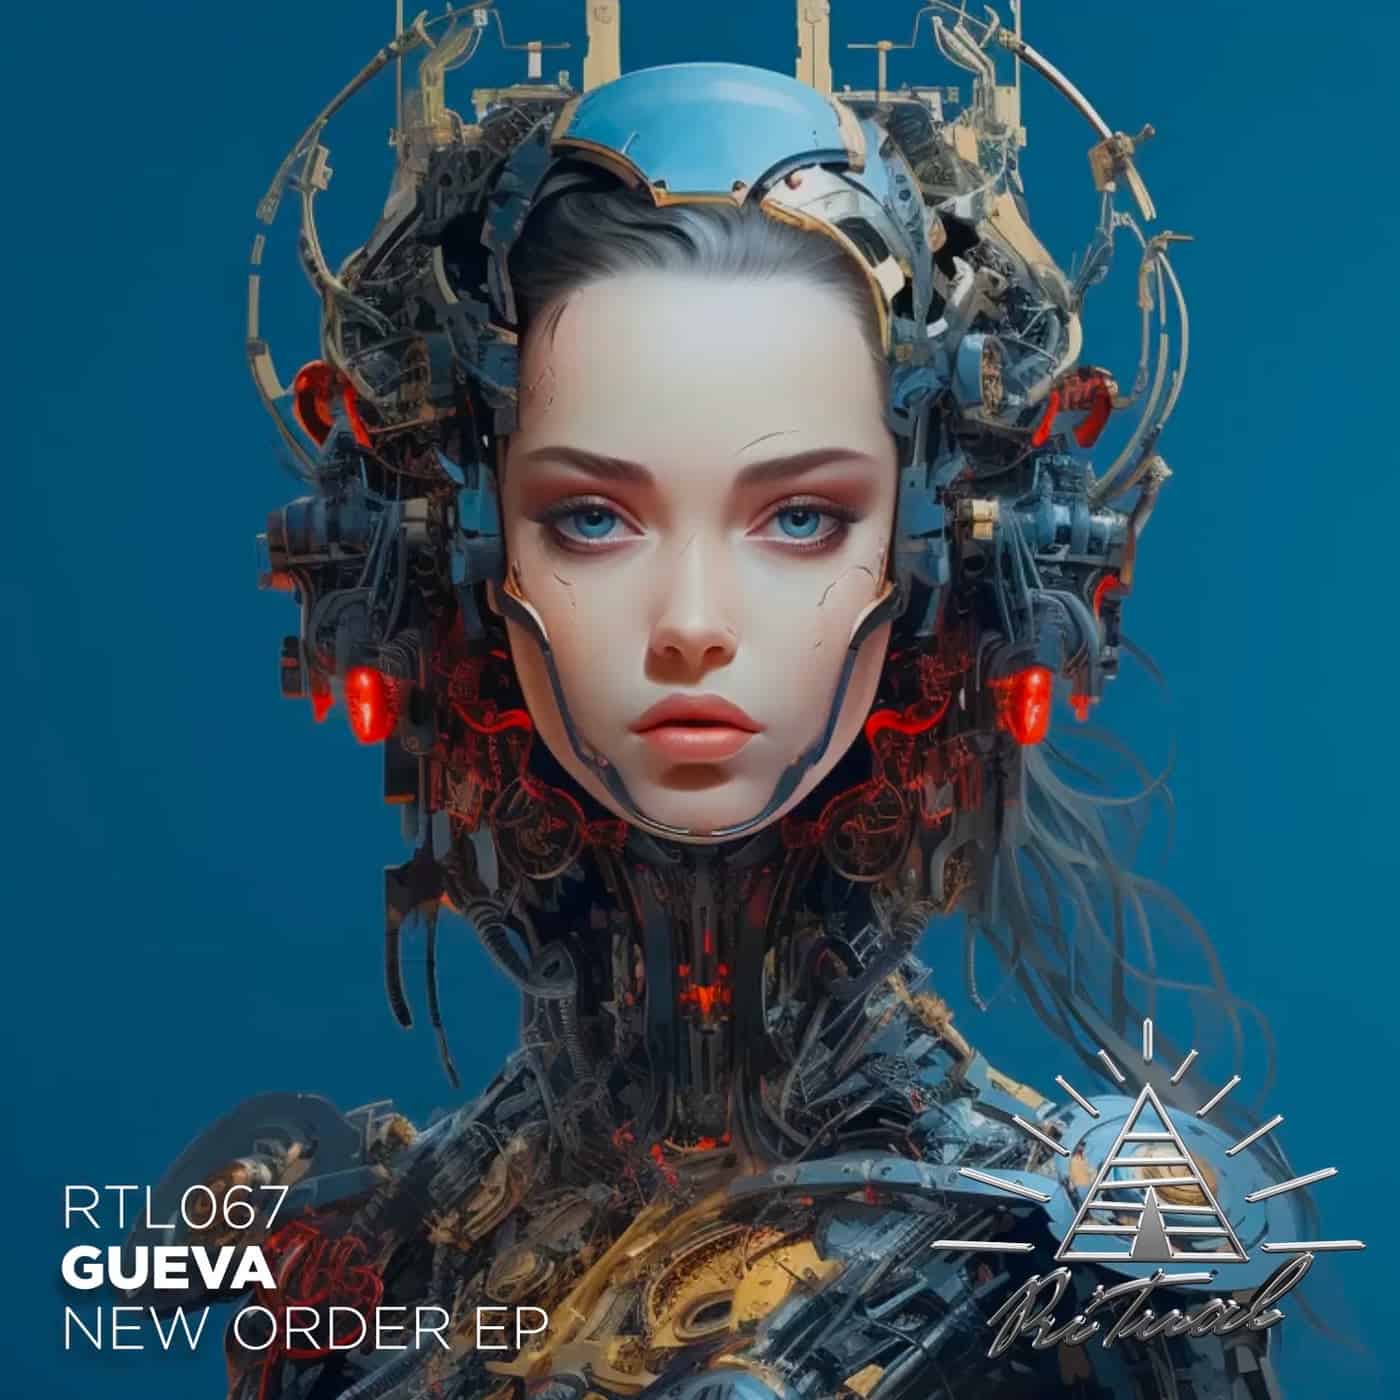 image cover: New Order EP by Gueva on Ritual